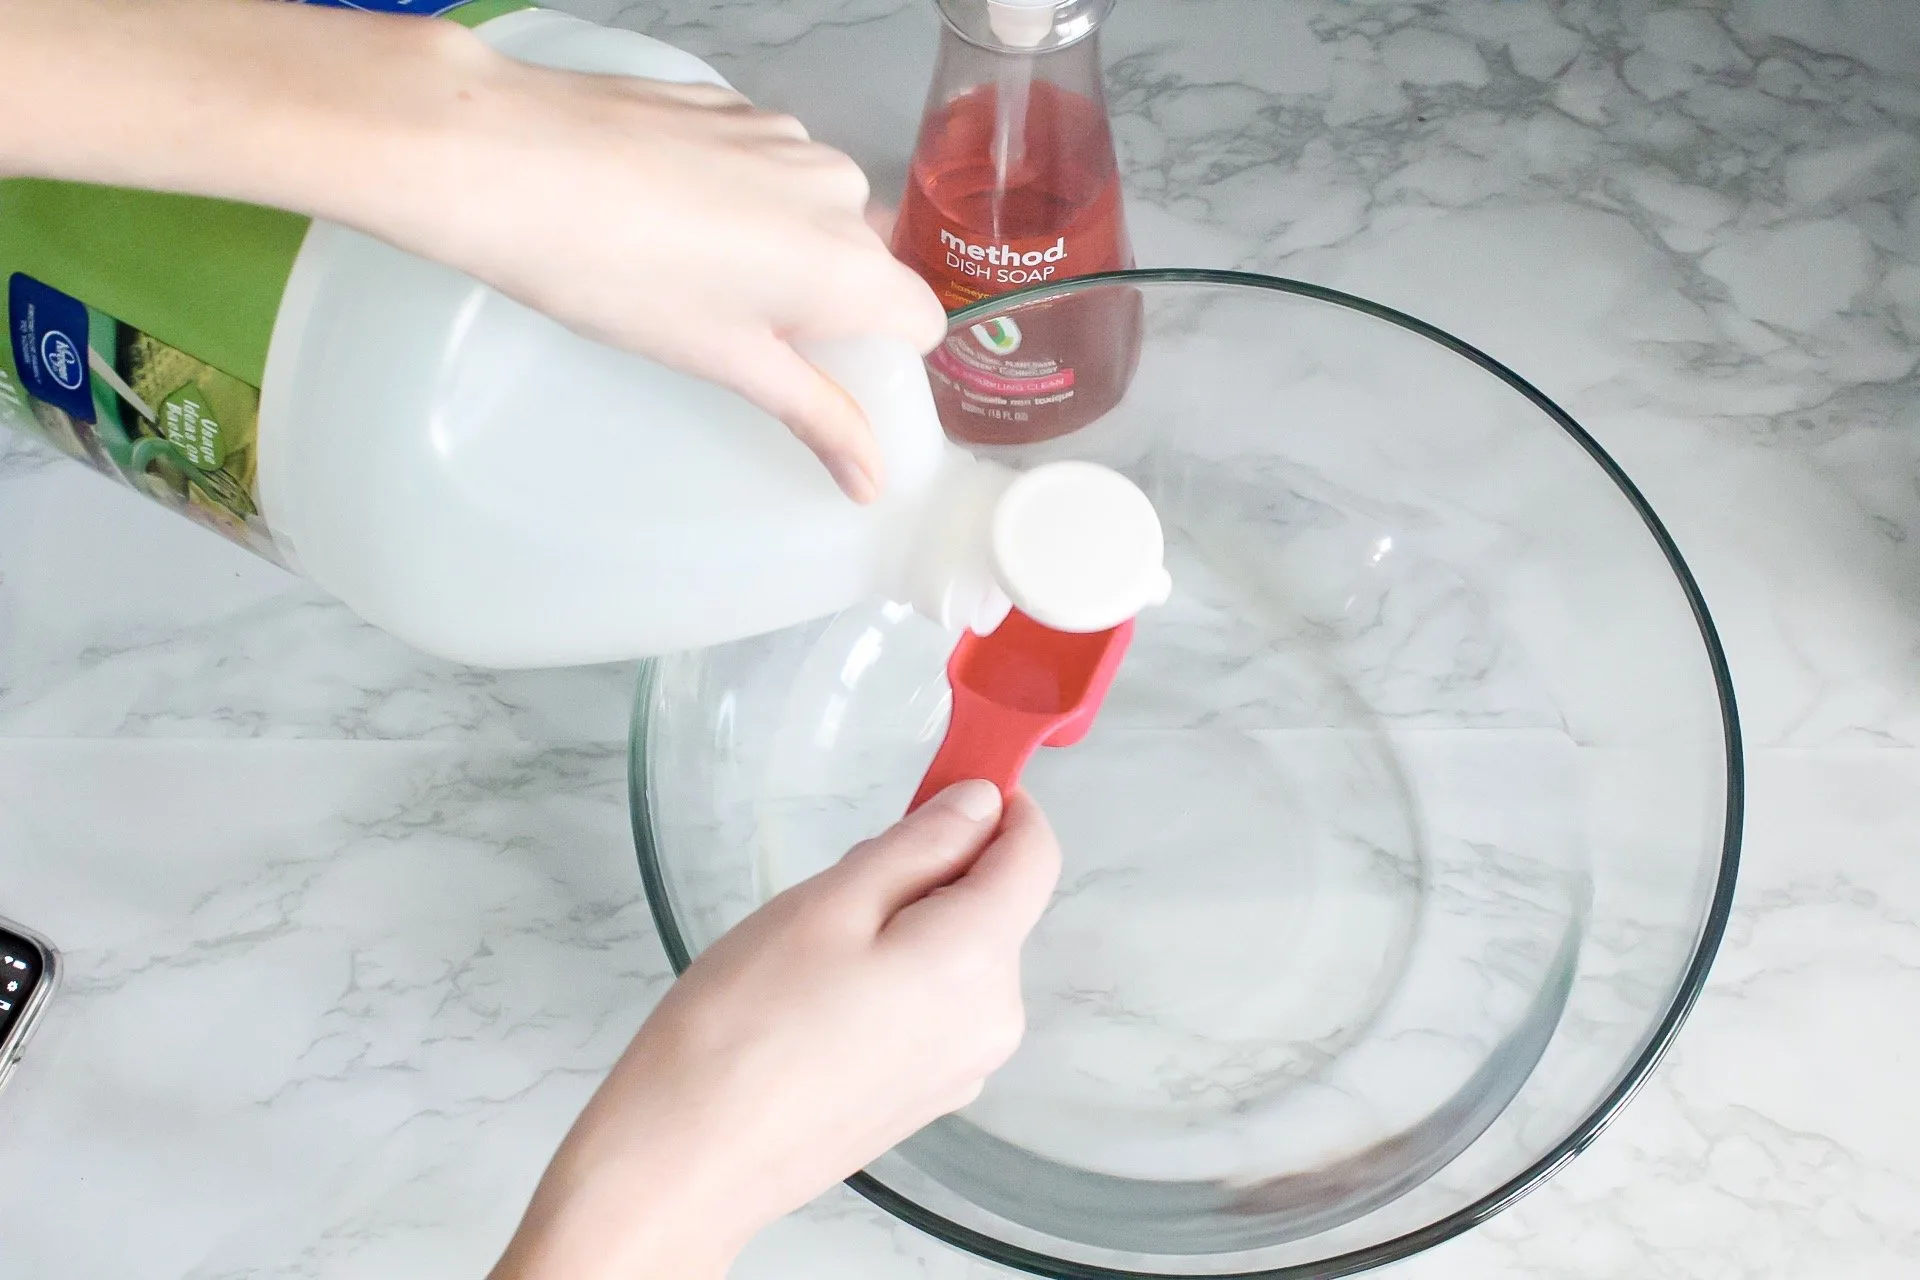 Measuring vinegar into tablespoon to put into homemade cleaning solution